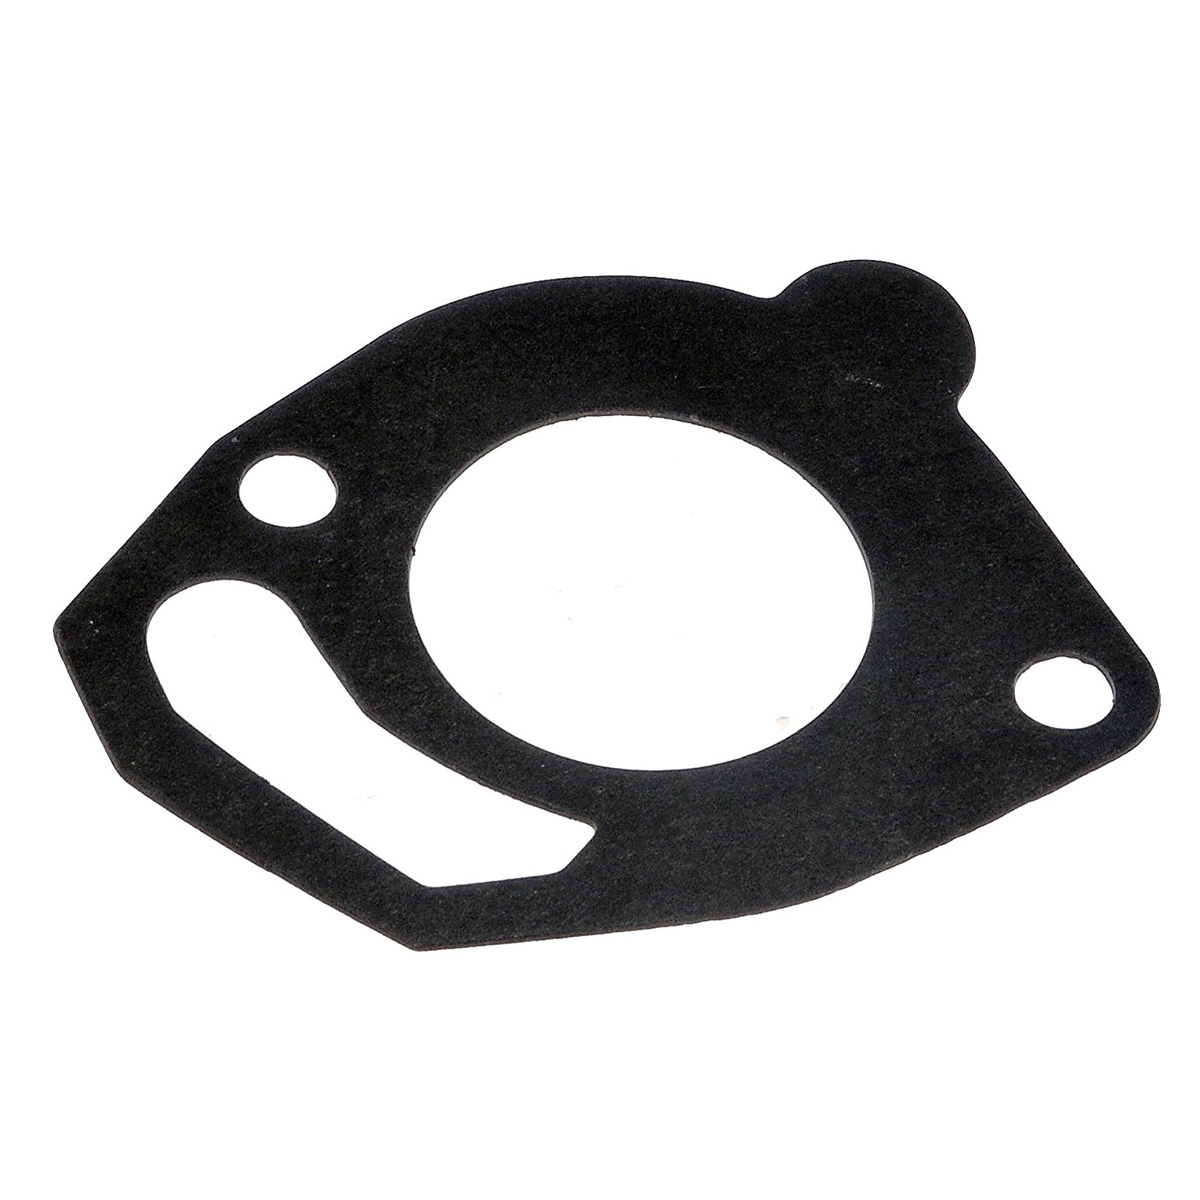 VAUXHALL AND OPEL GRANDLAND X Thermostat Gasket